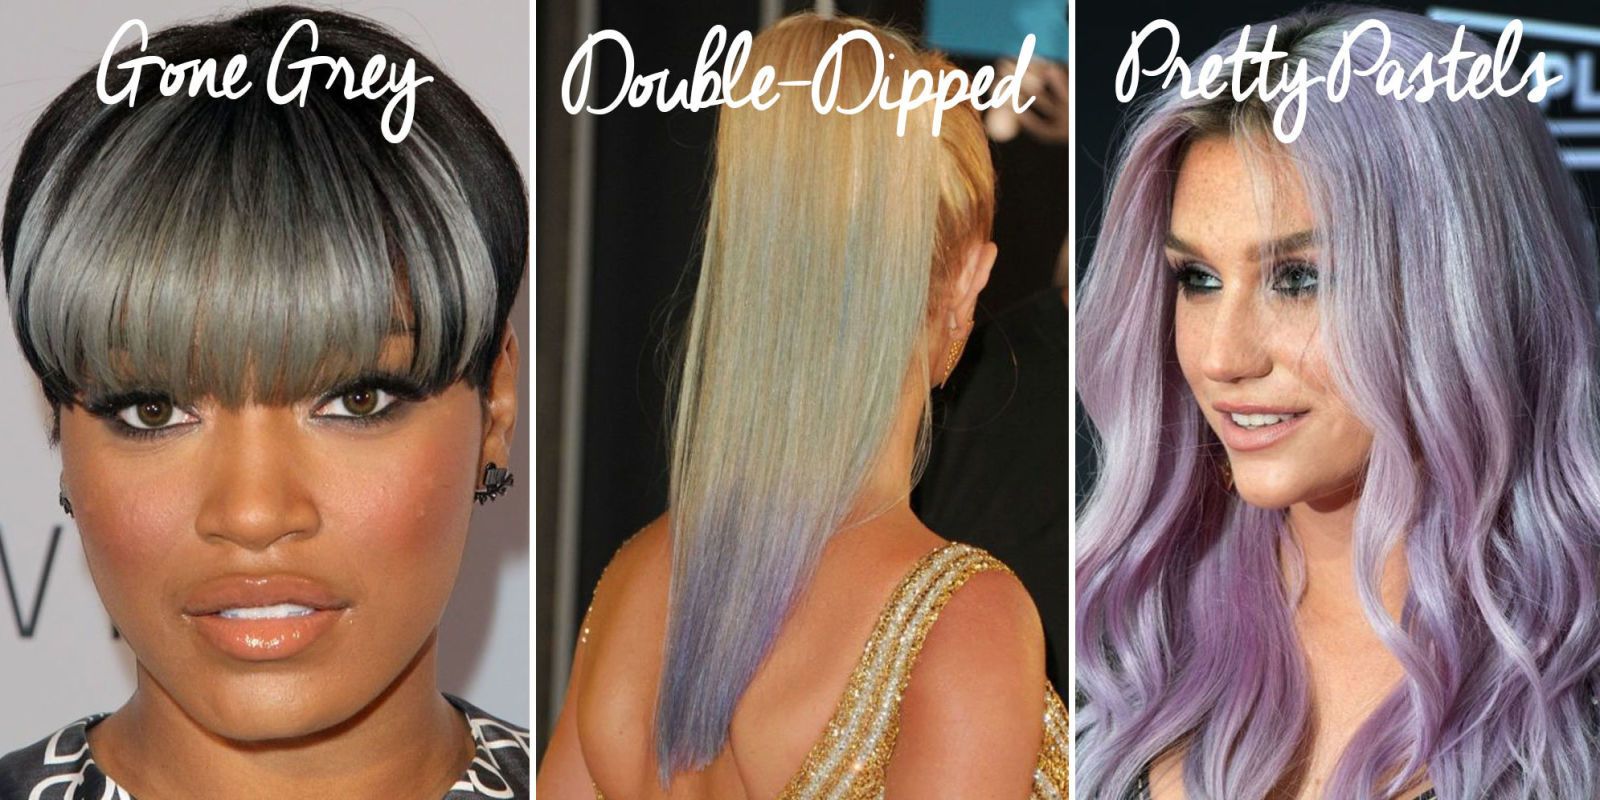 40 Fun Purple Hair Color Ideas to Try in 2024 - The Trend Spotter